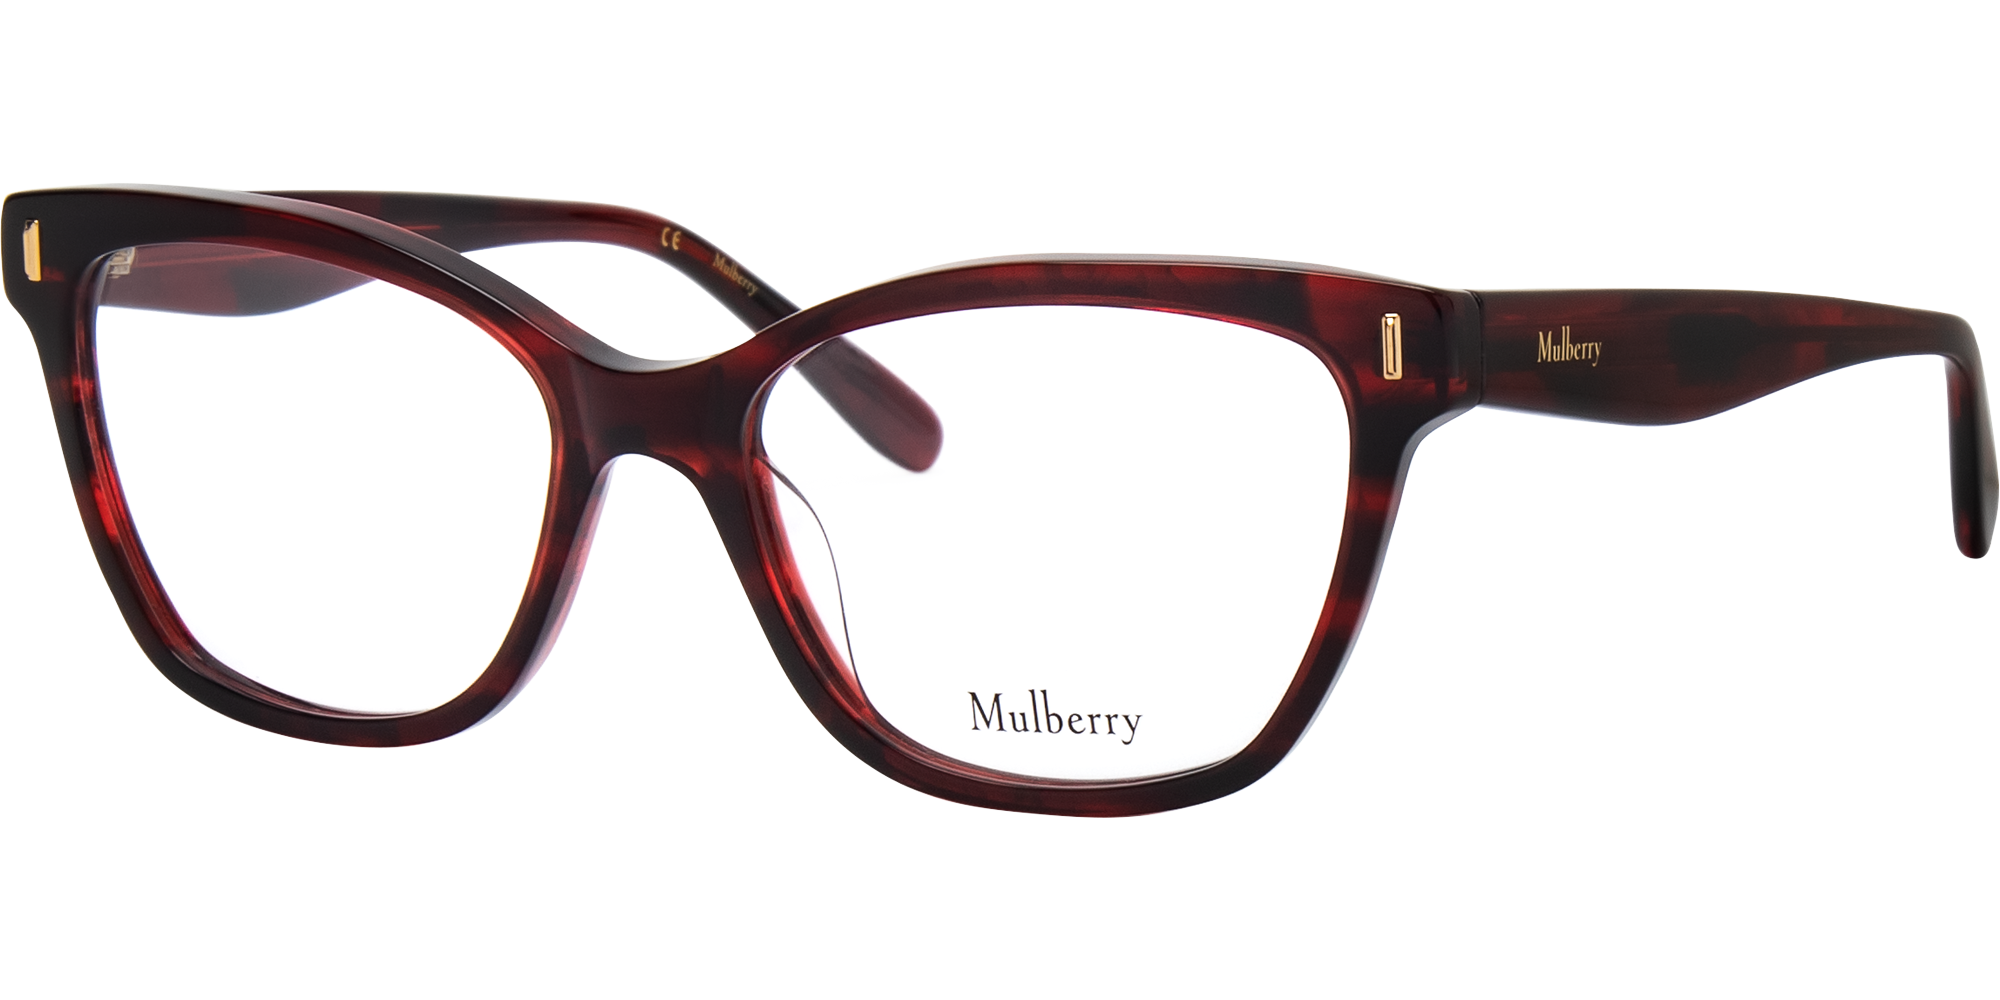 Mulberry VML123 image number null